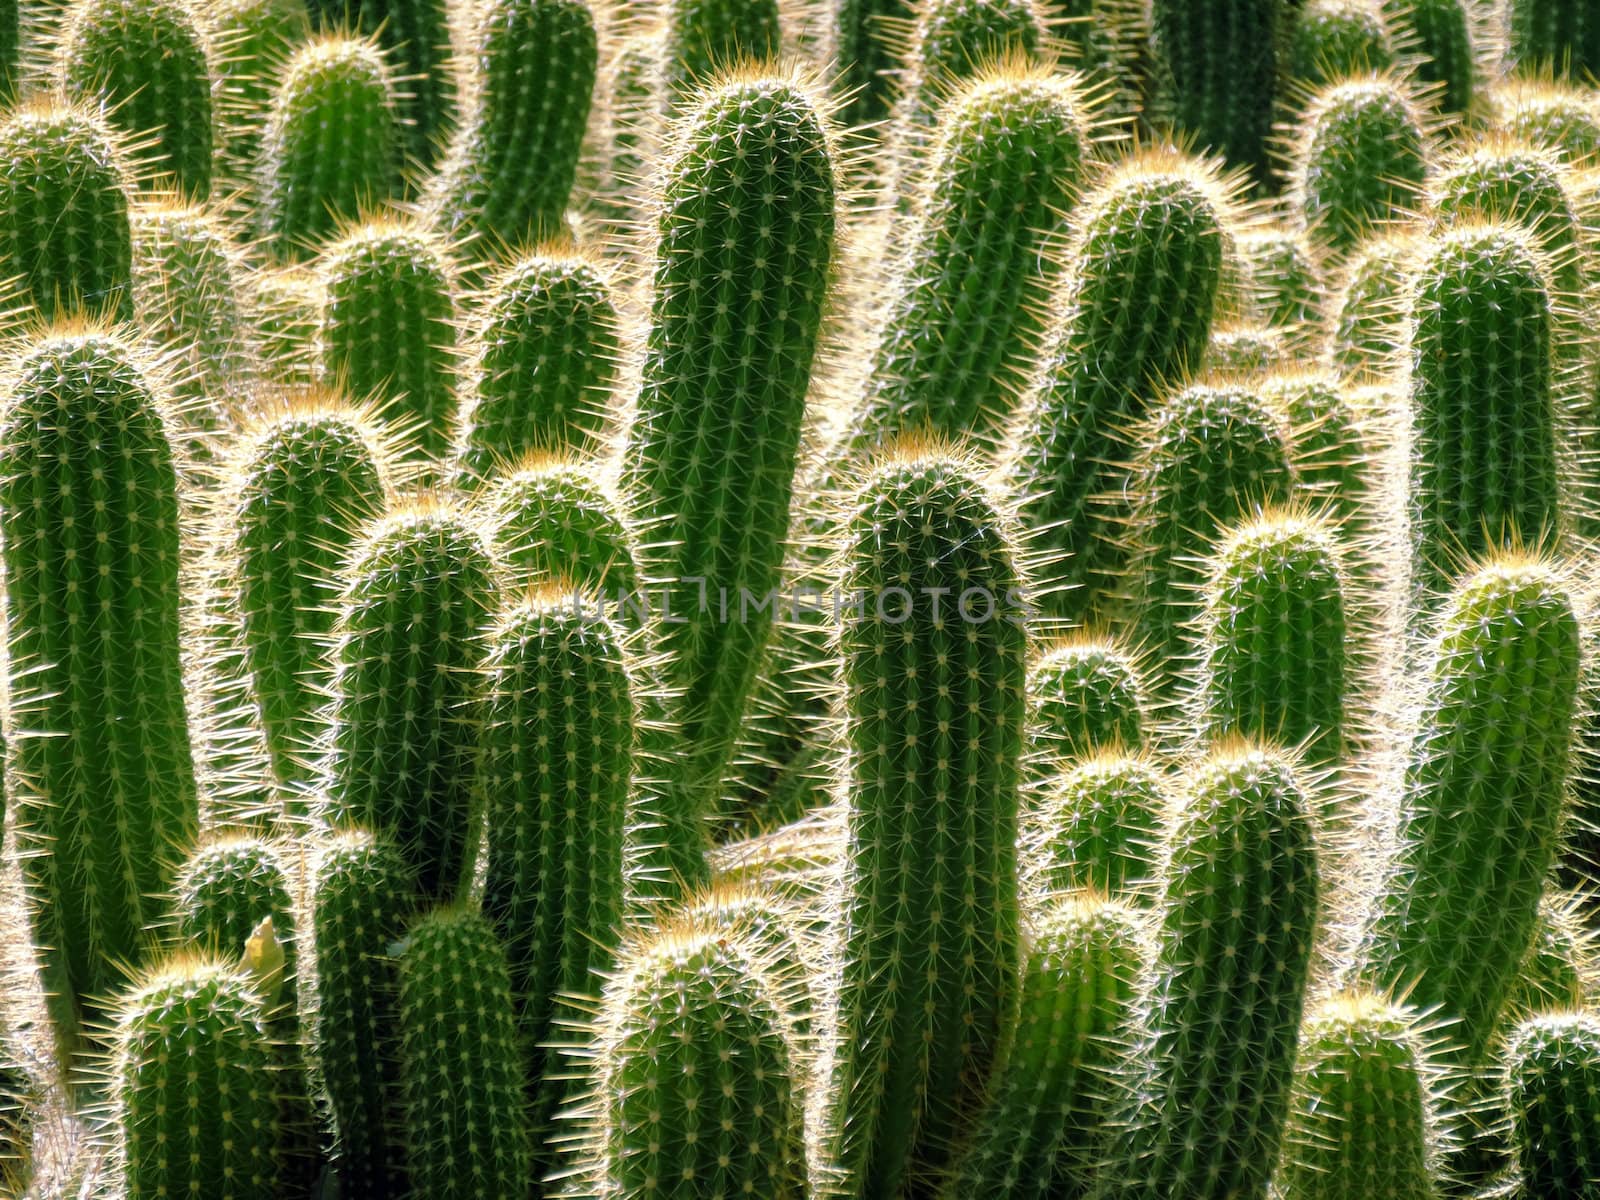 Several cactus with bright spines